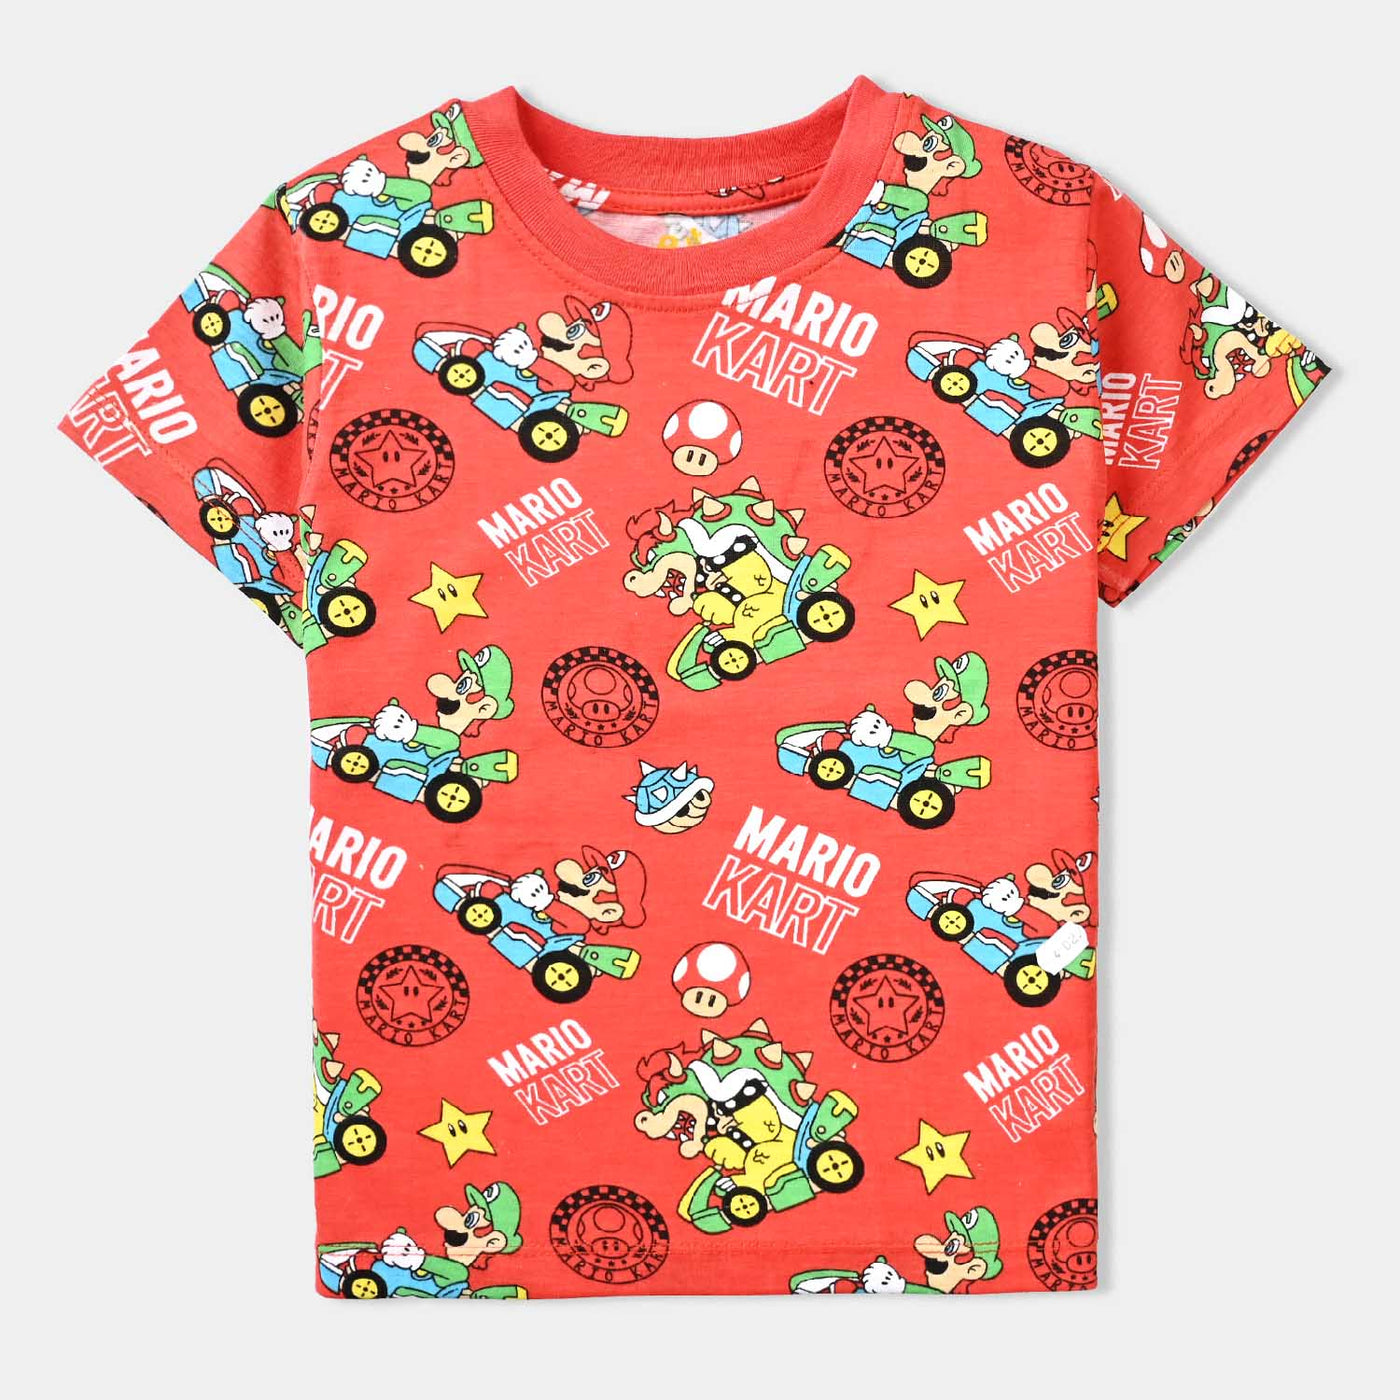 Boys PC Jersey Knitted NightWear Character Kart-HR Red